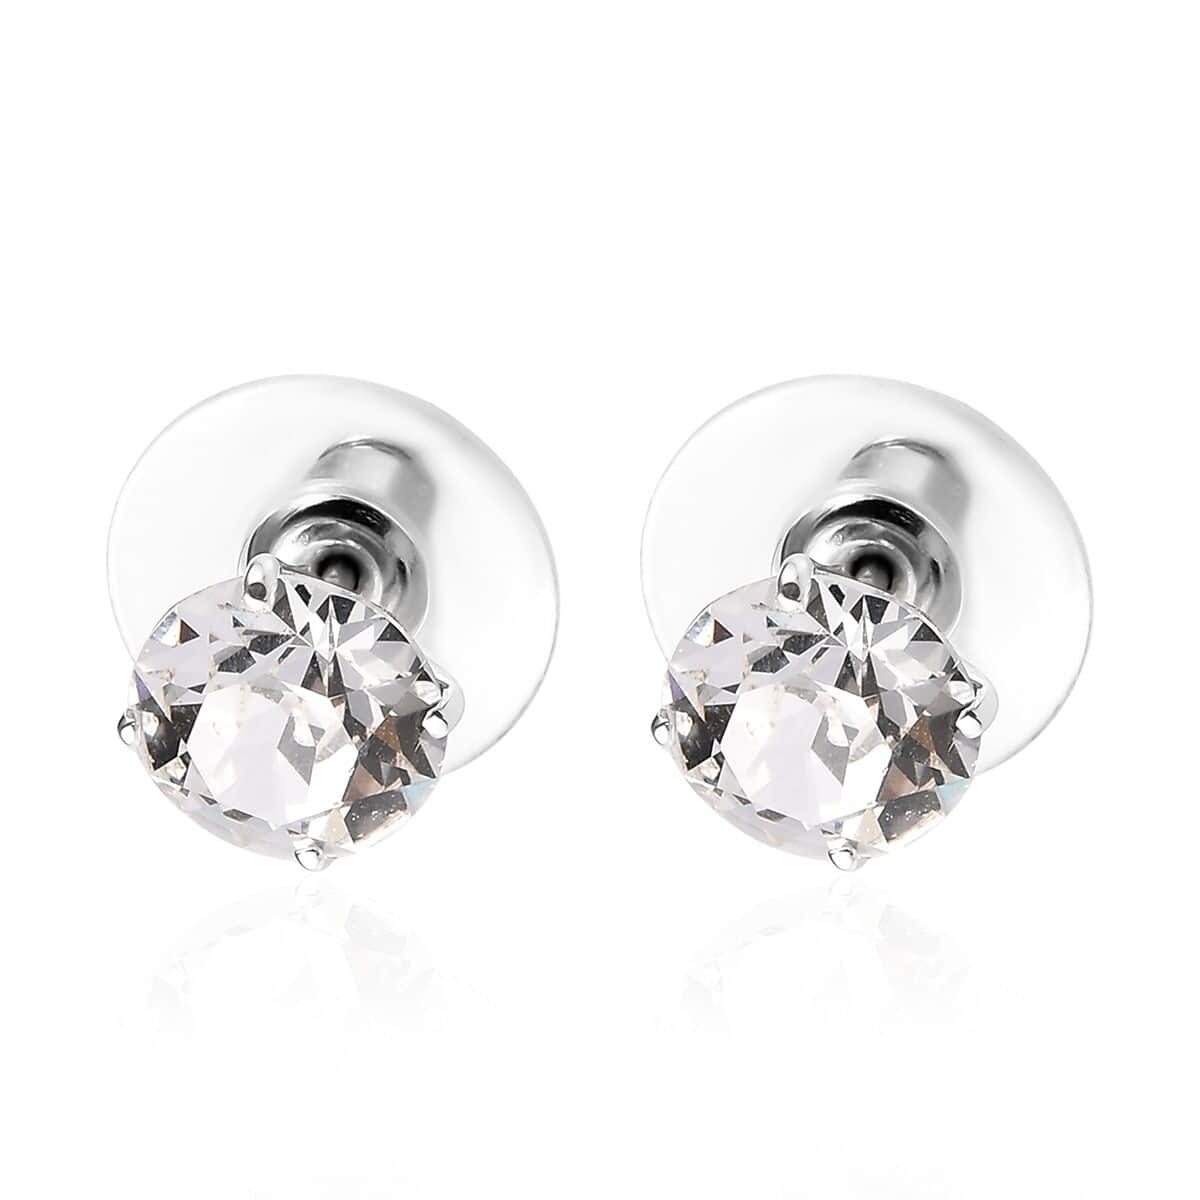 Buy White Crystal Solitaire Stud Earrings in Sterling Silver at